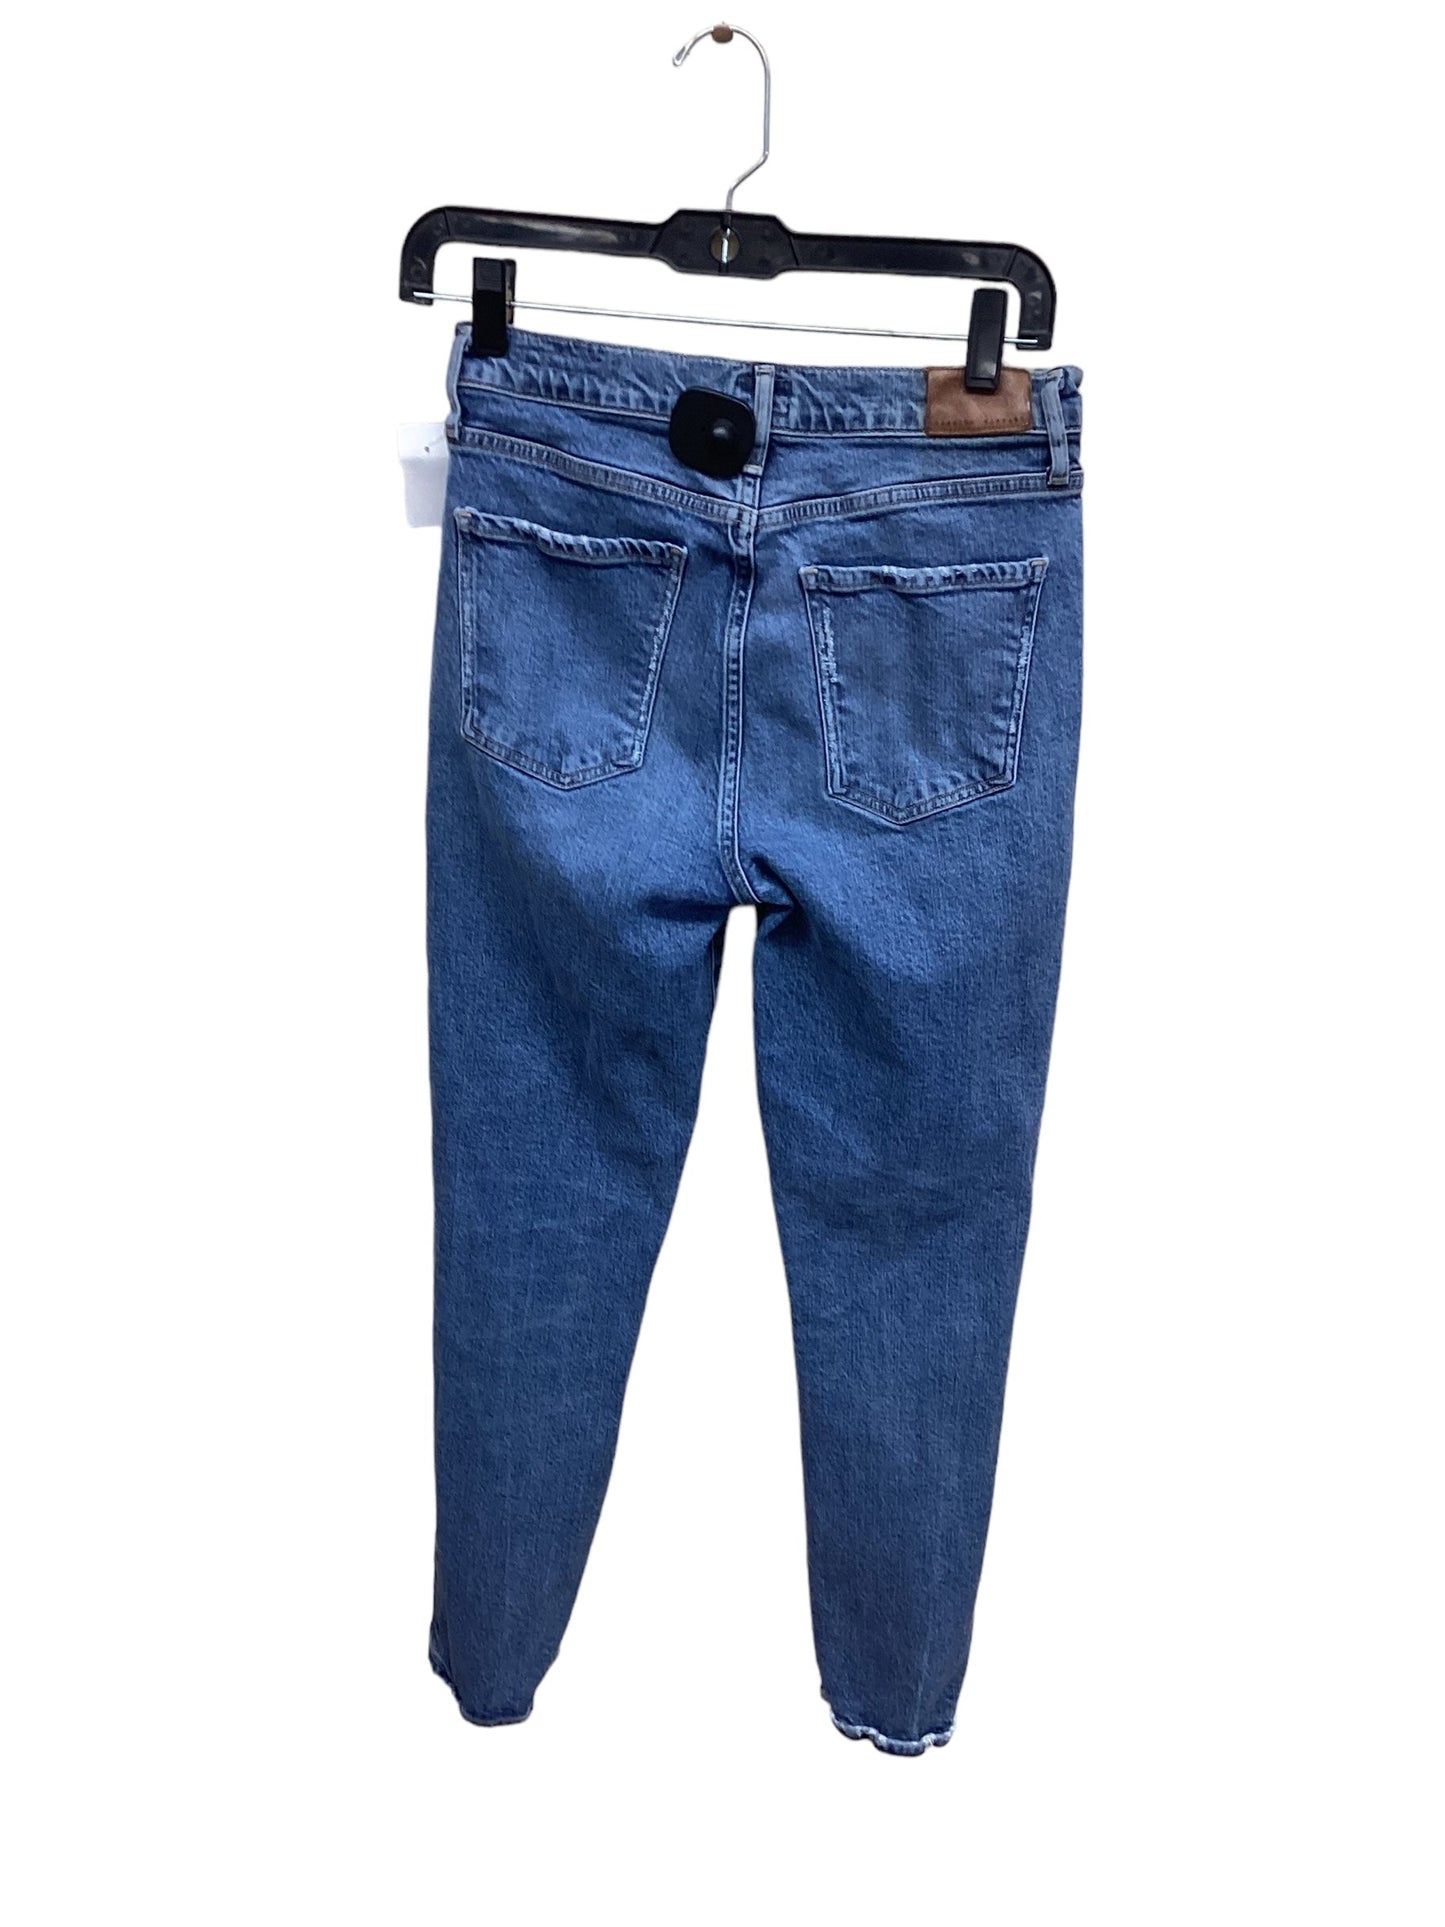 Jeans Skinny By Citizens Of Humanity  Size: 4